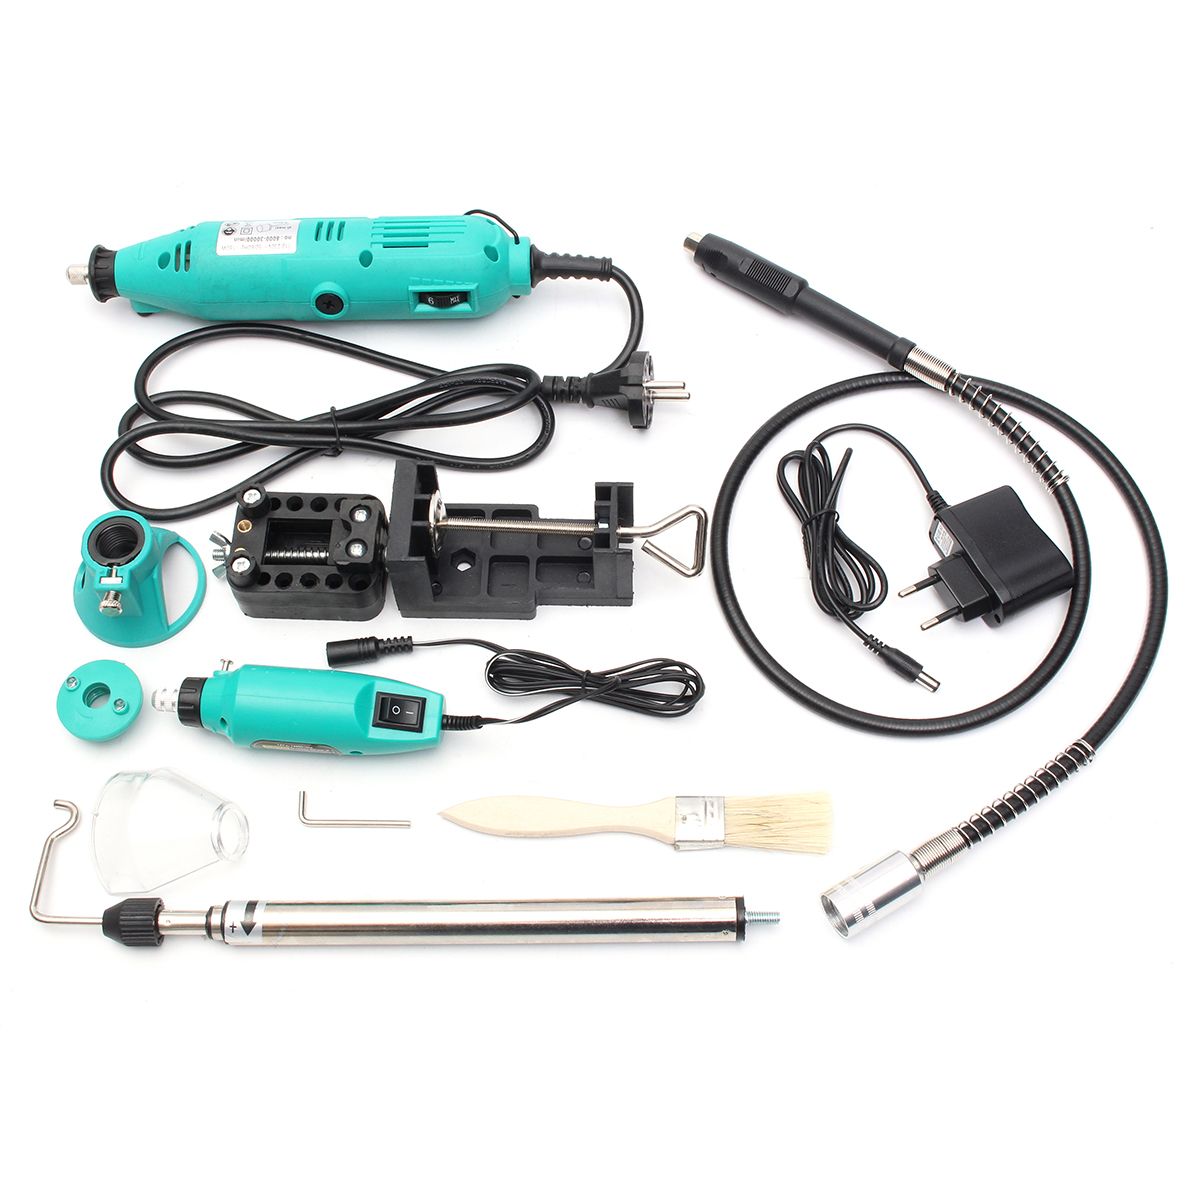 181Pcs-Mini-Drill-Electric-Grinder-Sanding-Polishing-Rotary-Tool-with-Accessory-Set-1299973